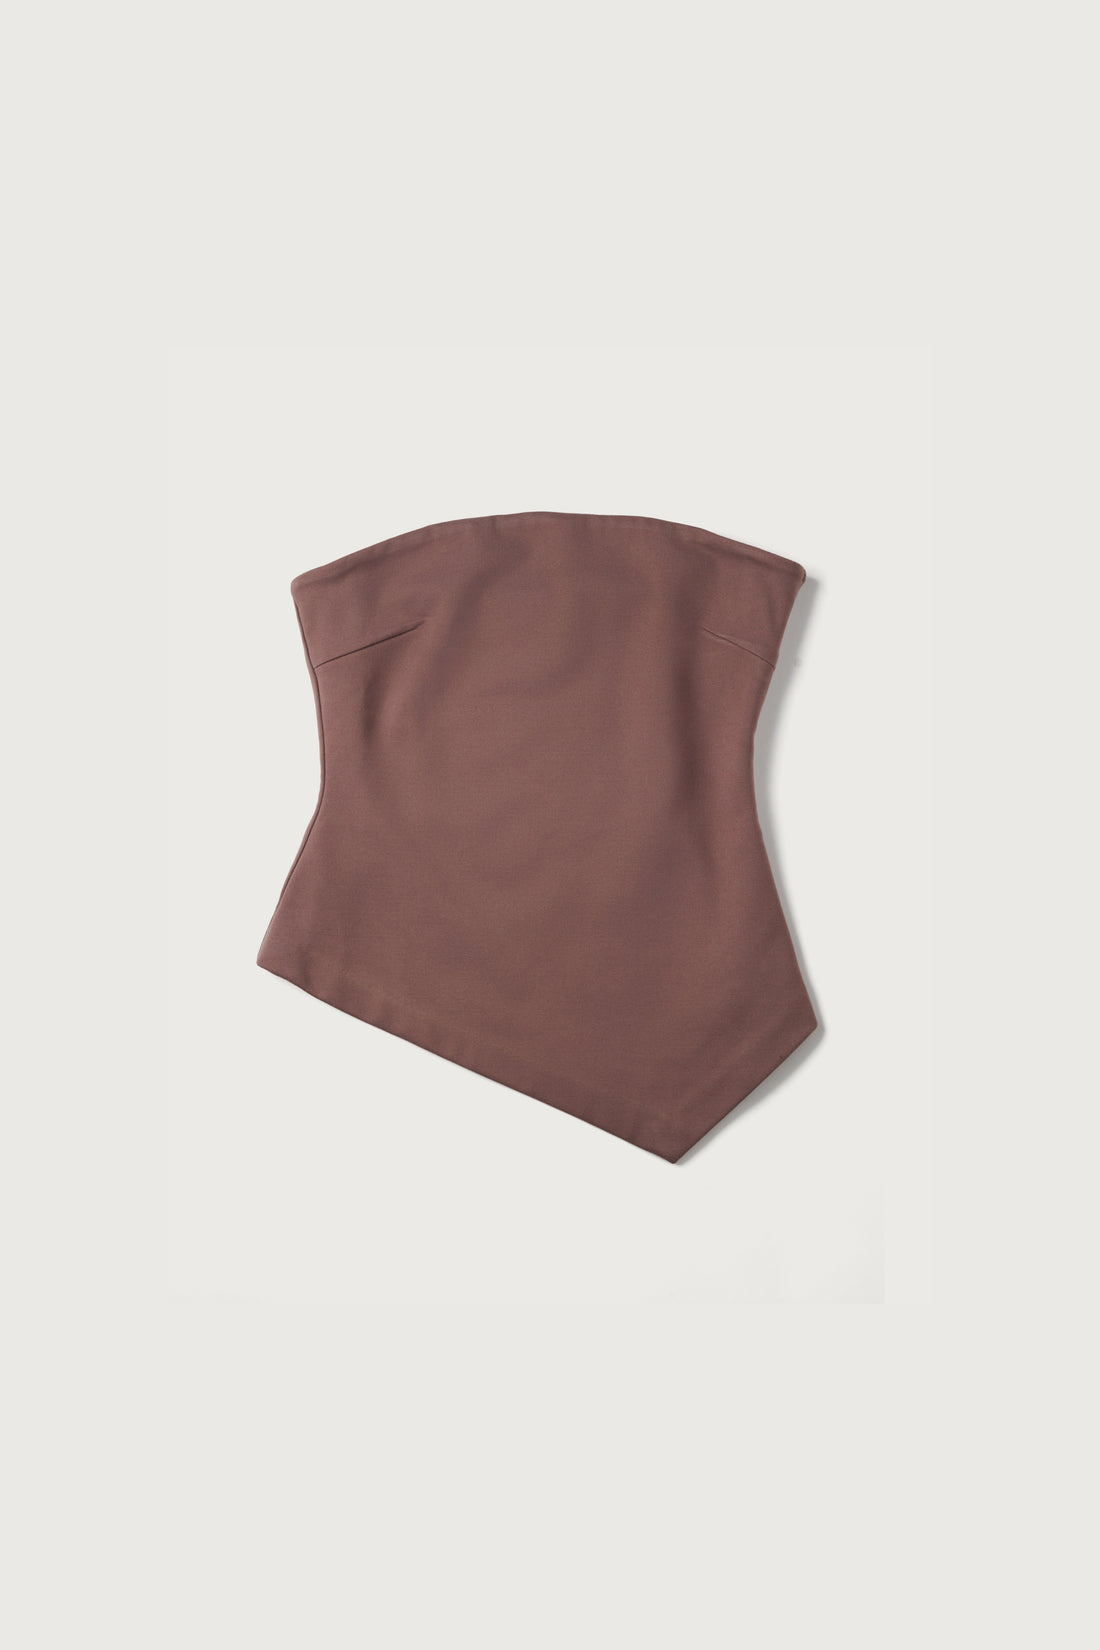 Tube Top + Brown - Little Puffy